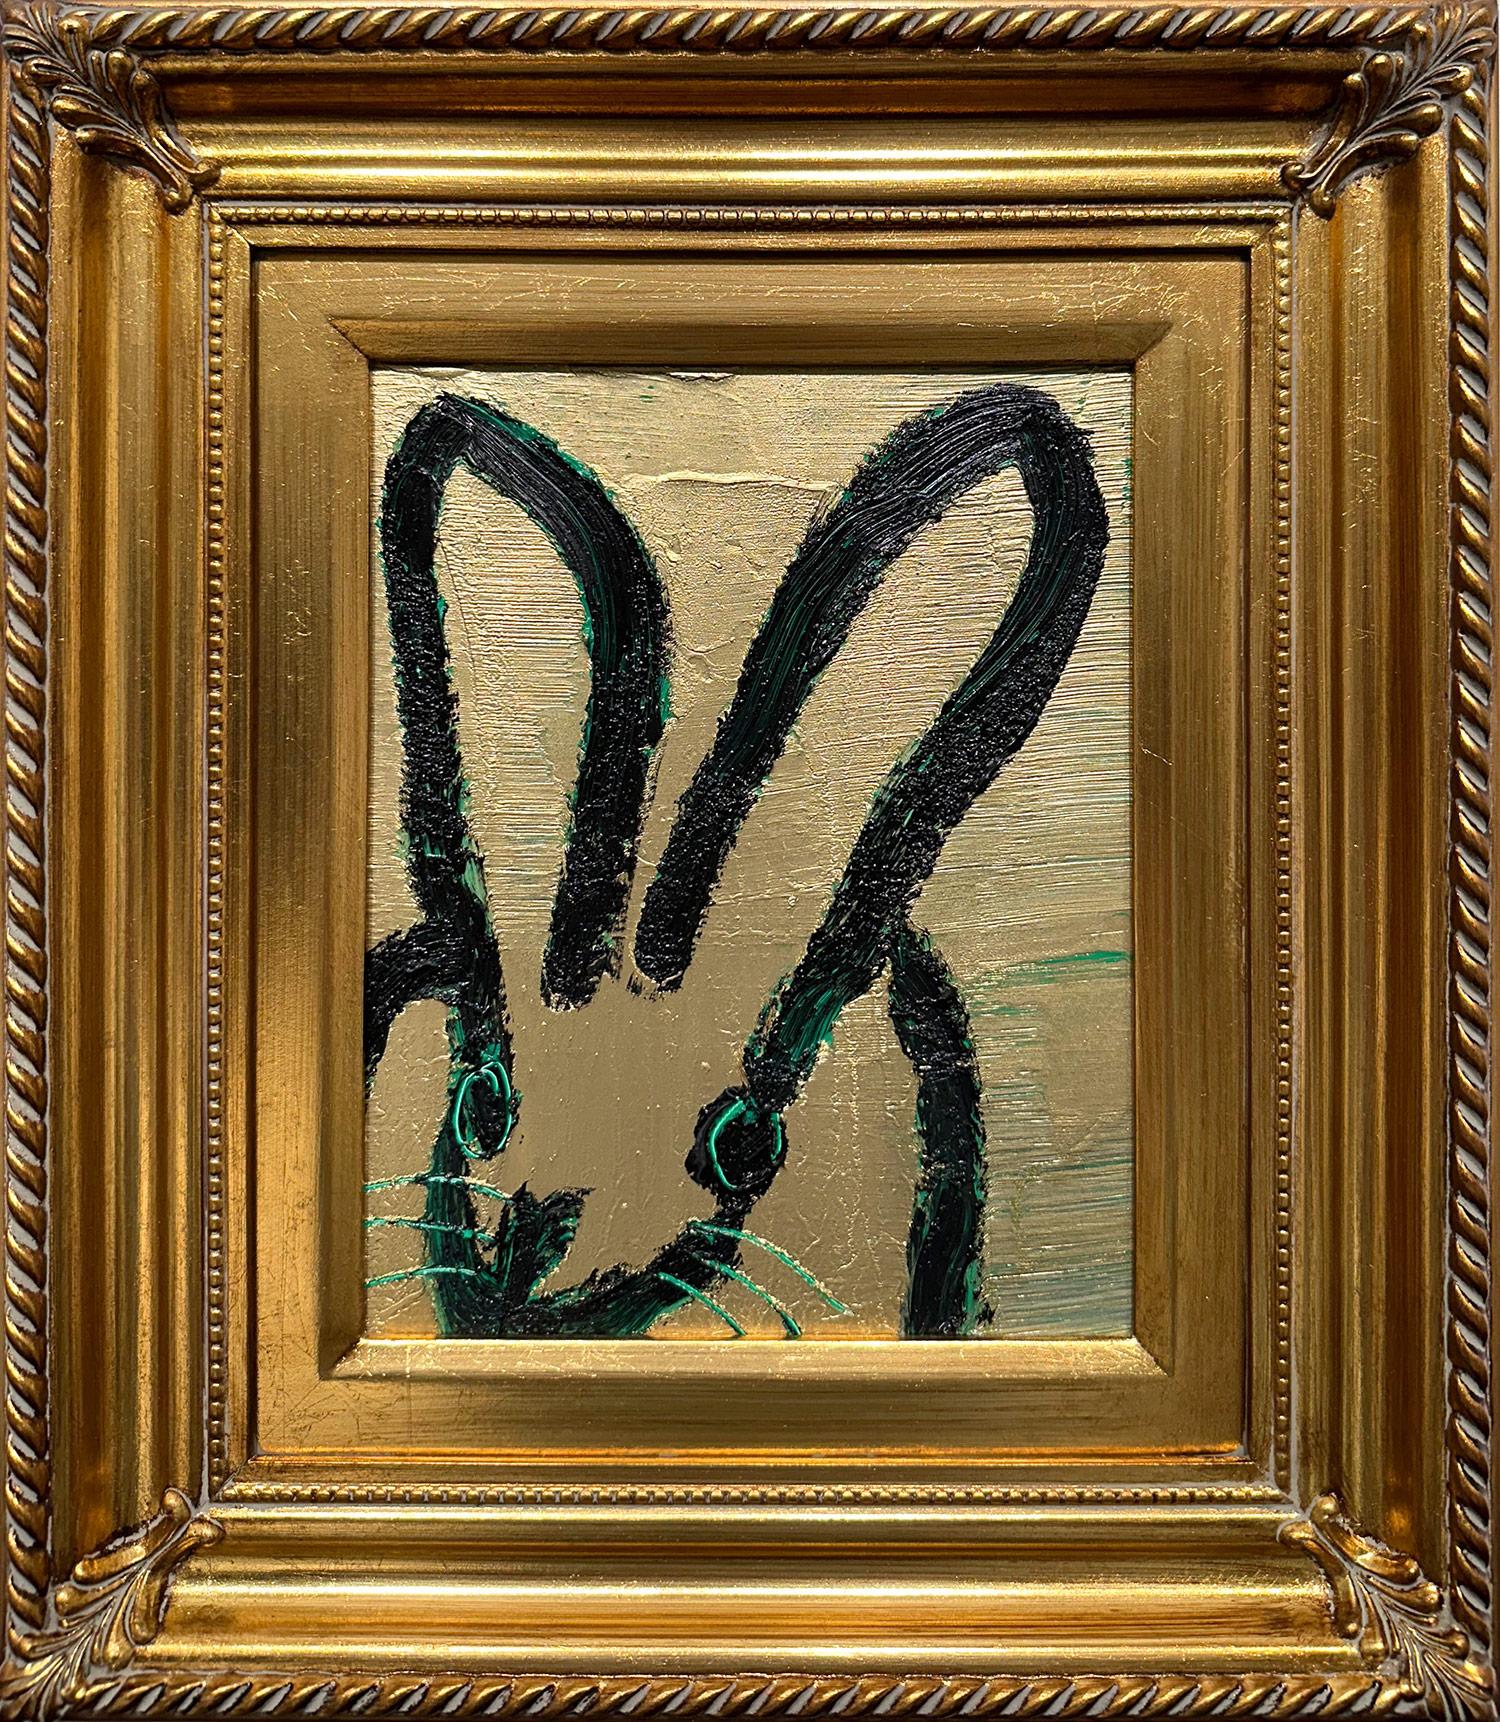 Hunt Slonem Abstract Painting - "Edgar" Black Bunny on Golden Background with Lime Green Accents & Scoring 